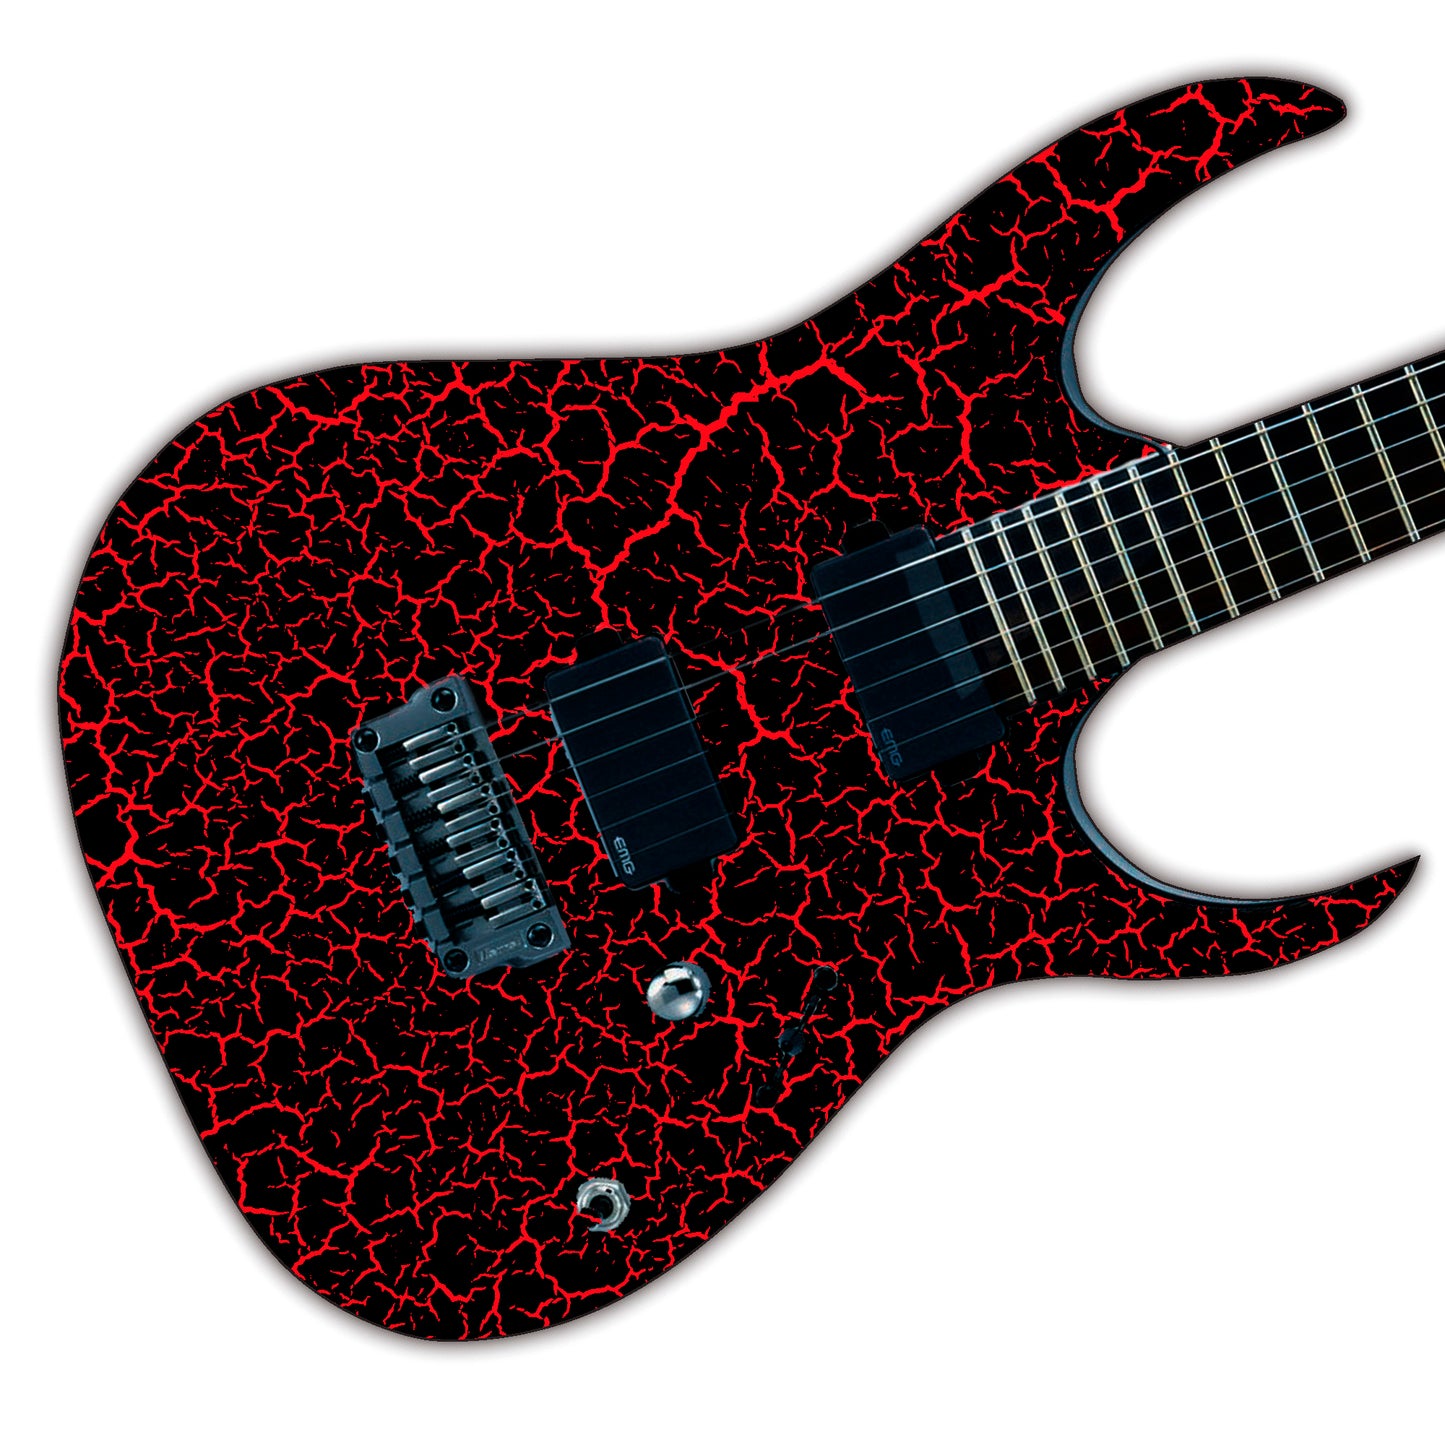 Guitar Skin Wrap Laminated Vinyl Decal Sticker The Master of Things Metal GS131